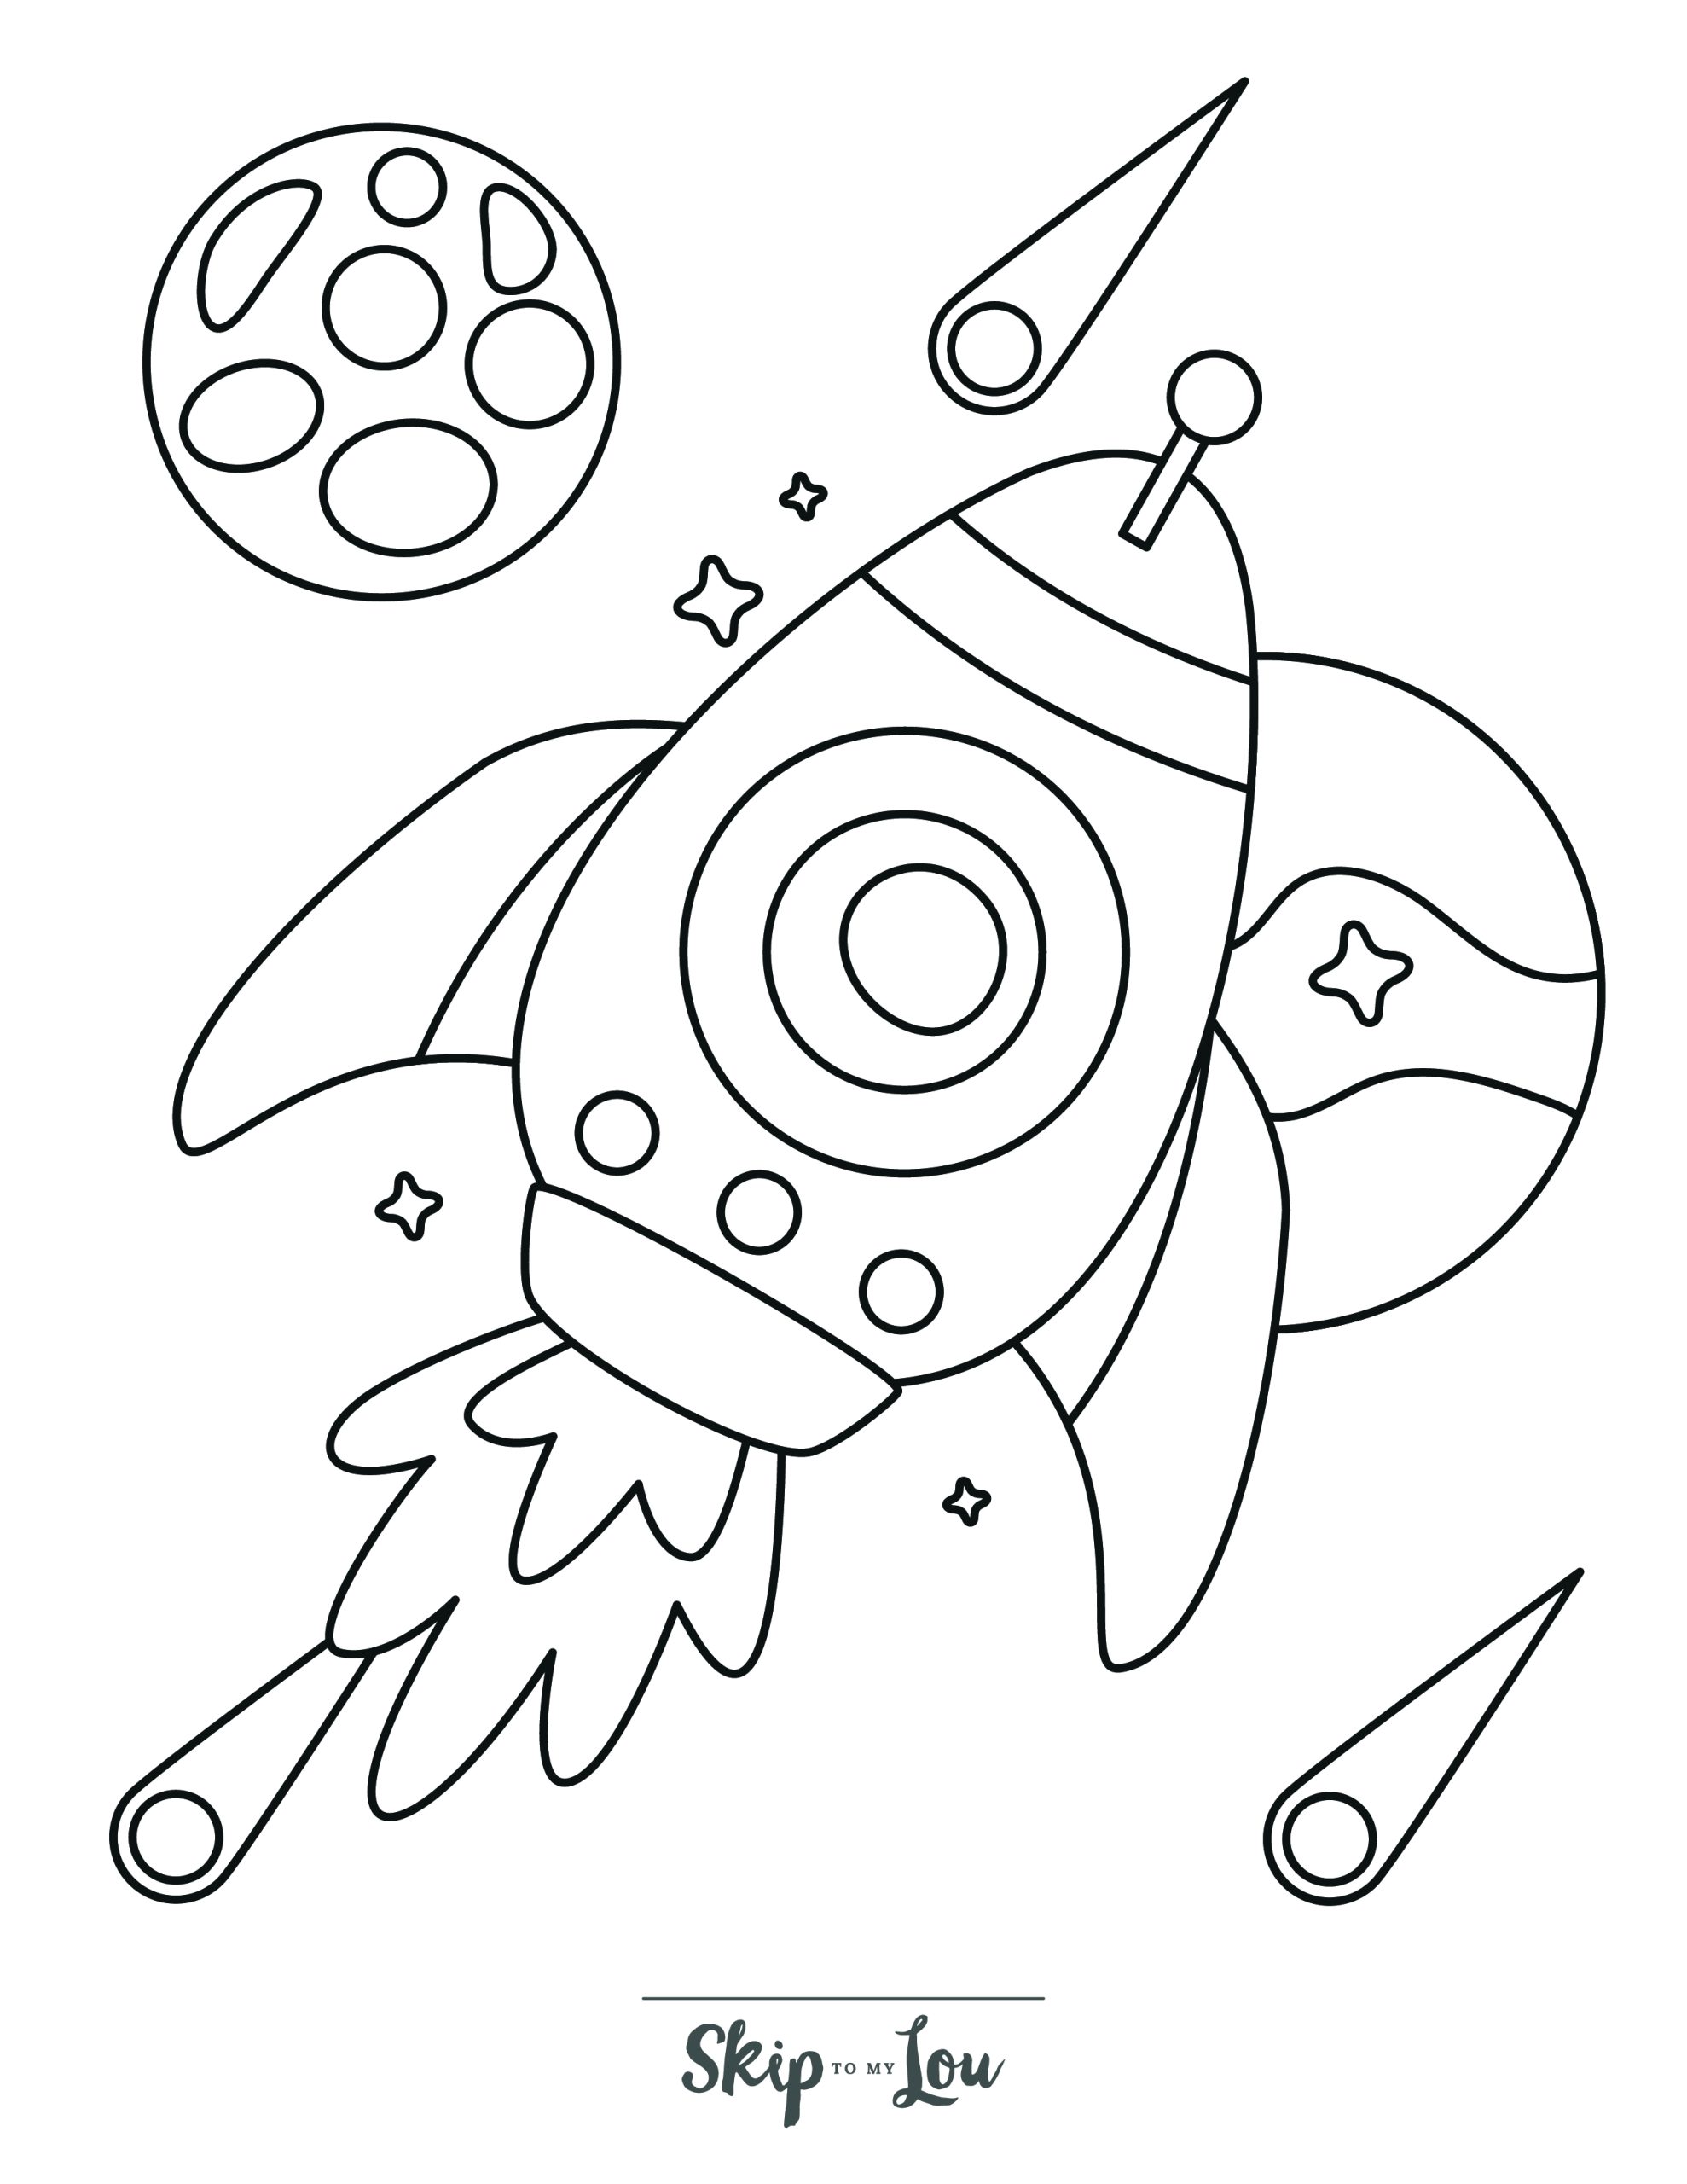 Space Coloring Page 4 - Large rocket with planets and comets in background